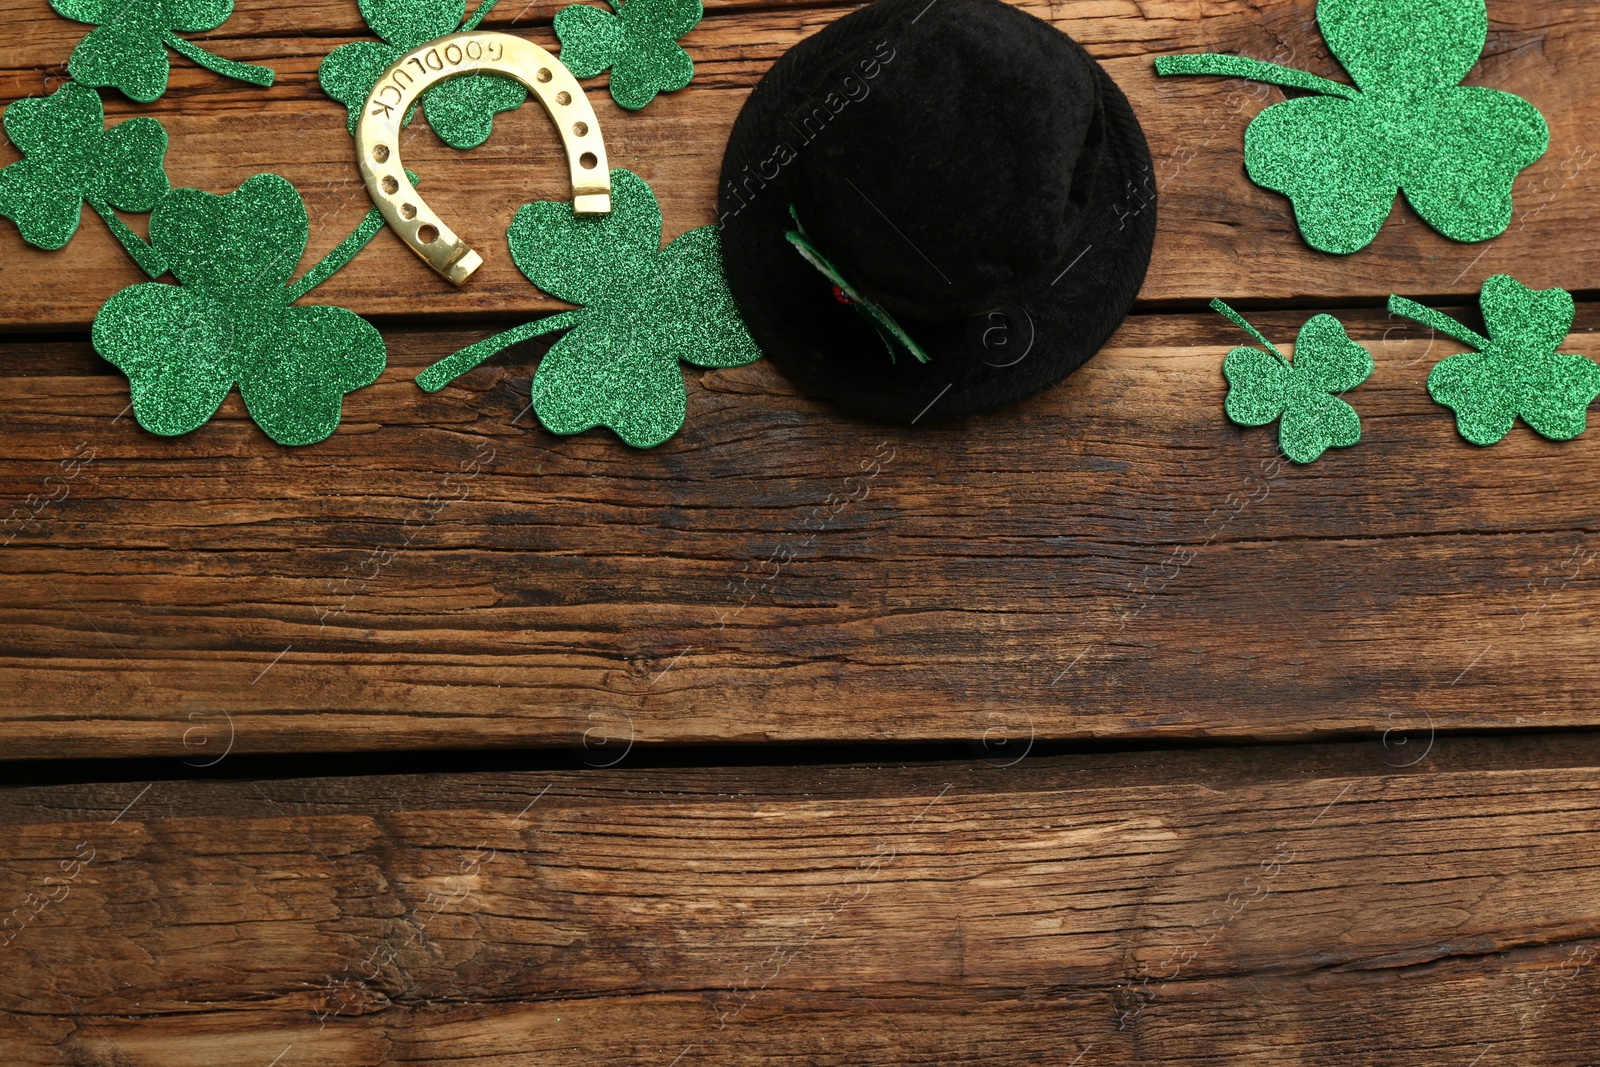 Photo of Flat lay composition with leprechaun hat on wooden table, space for text. St Patrick's Day celebration